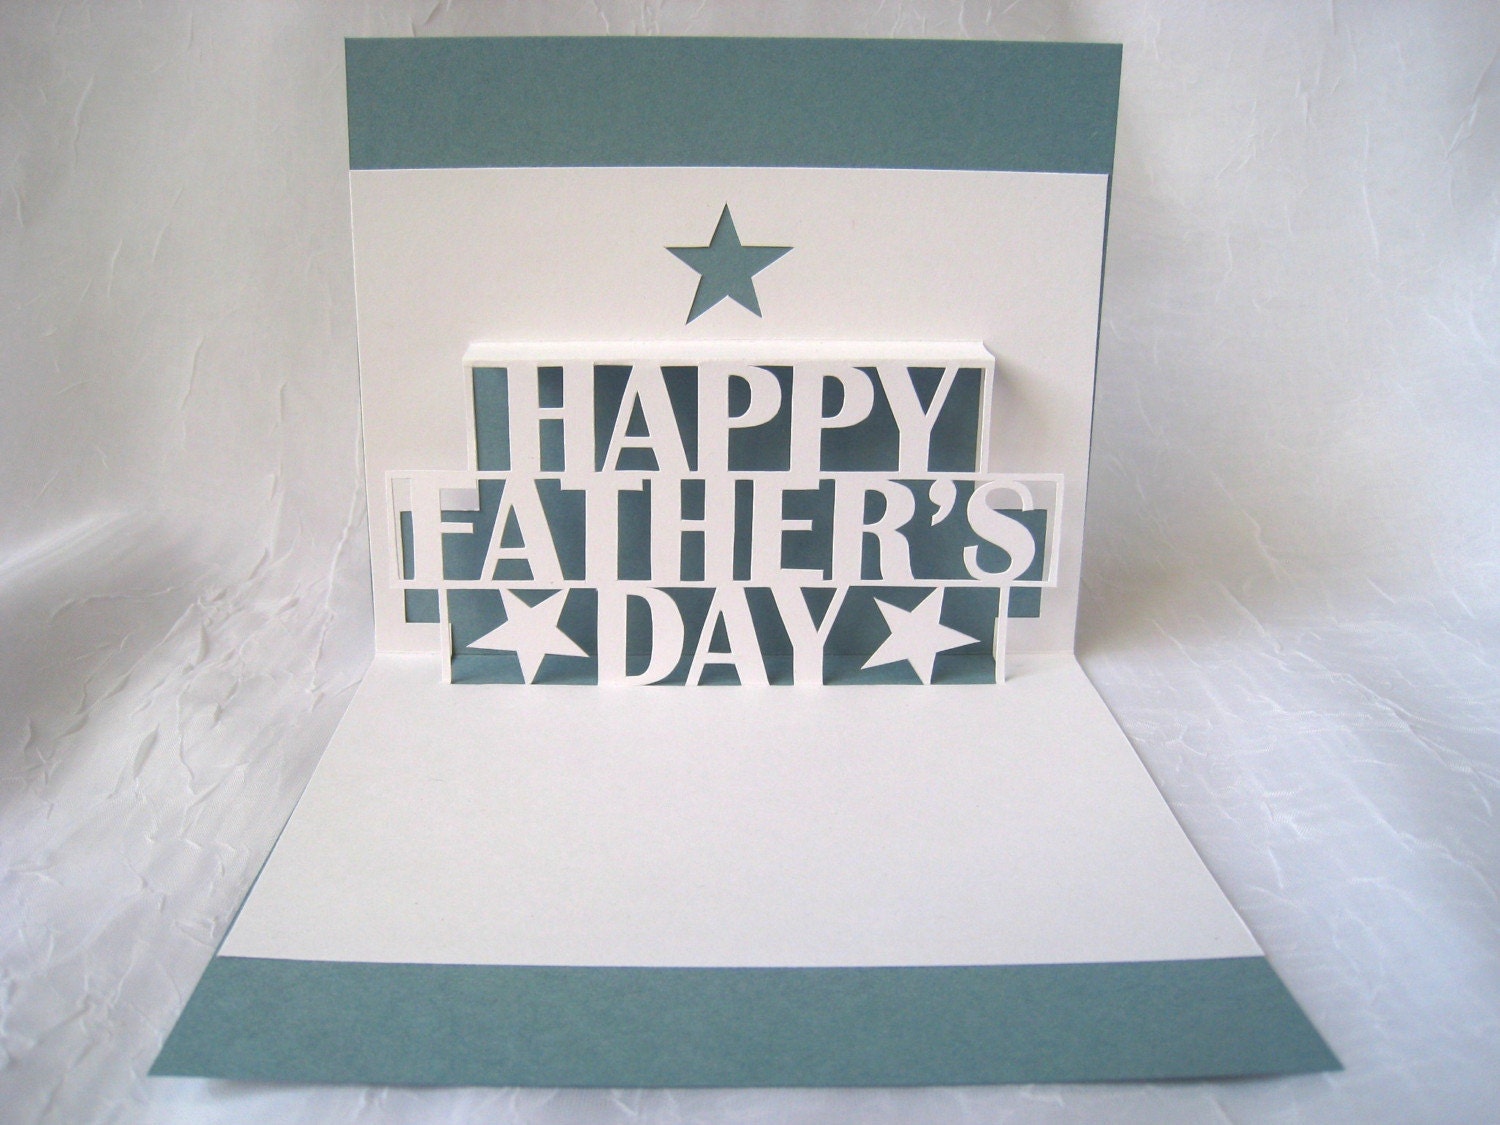 happy-father-s-day-pop-up-card-by-cookiebits-on-etsy